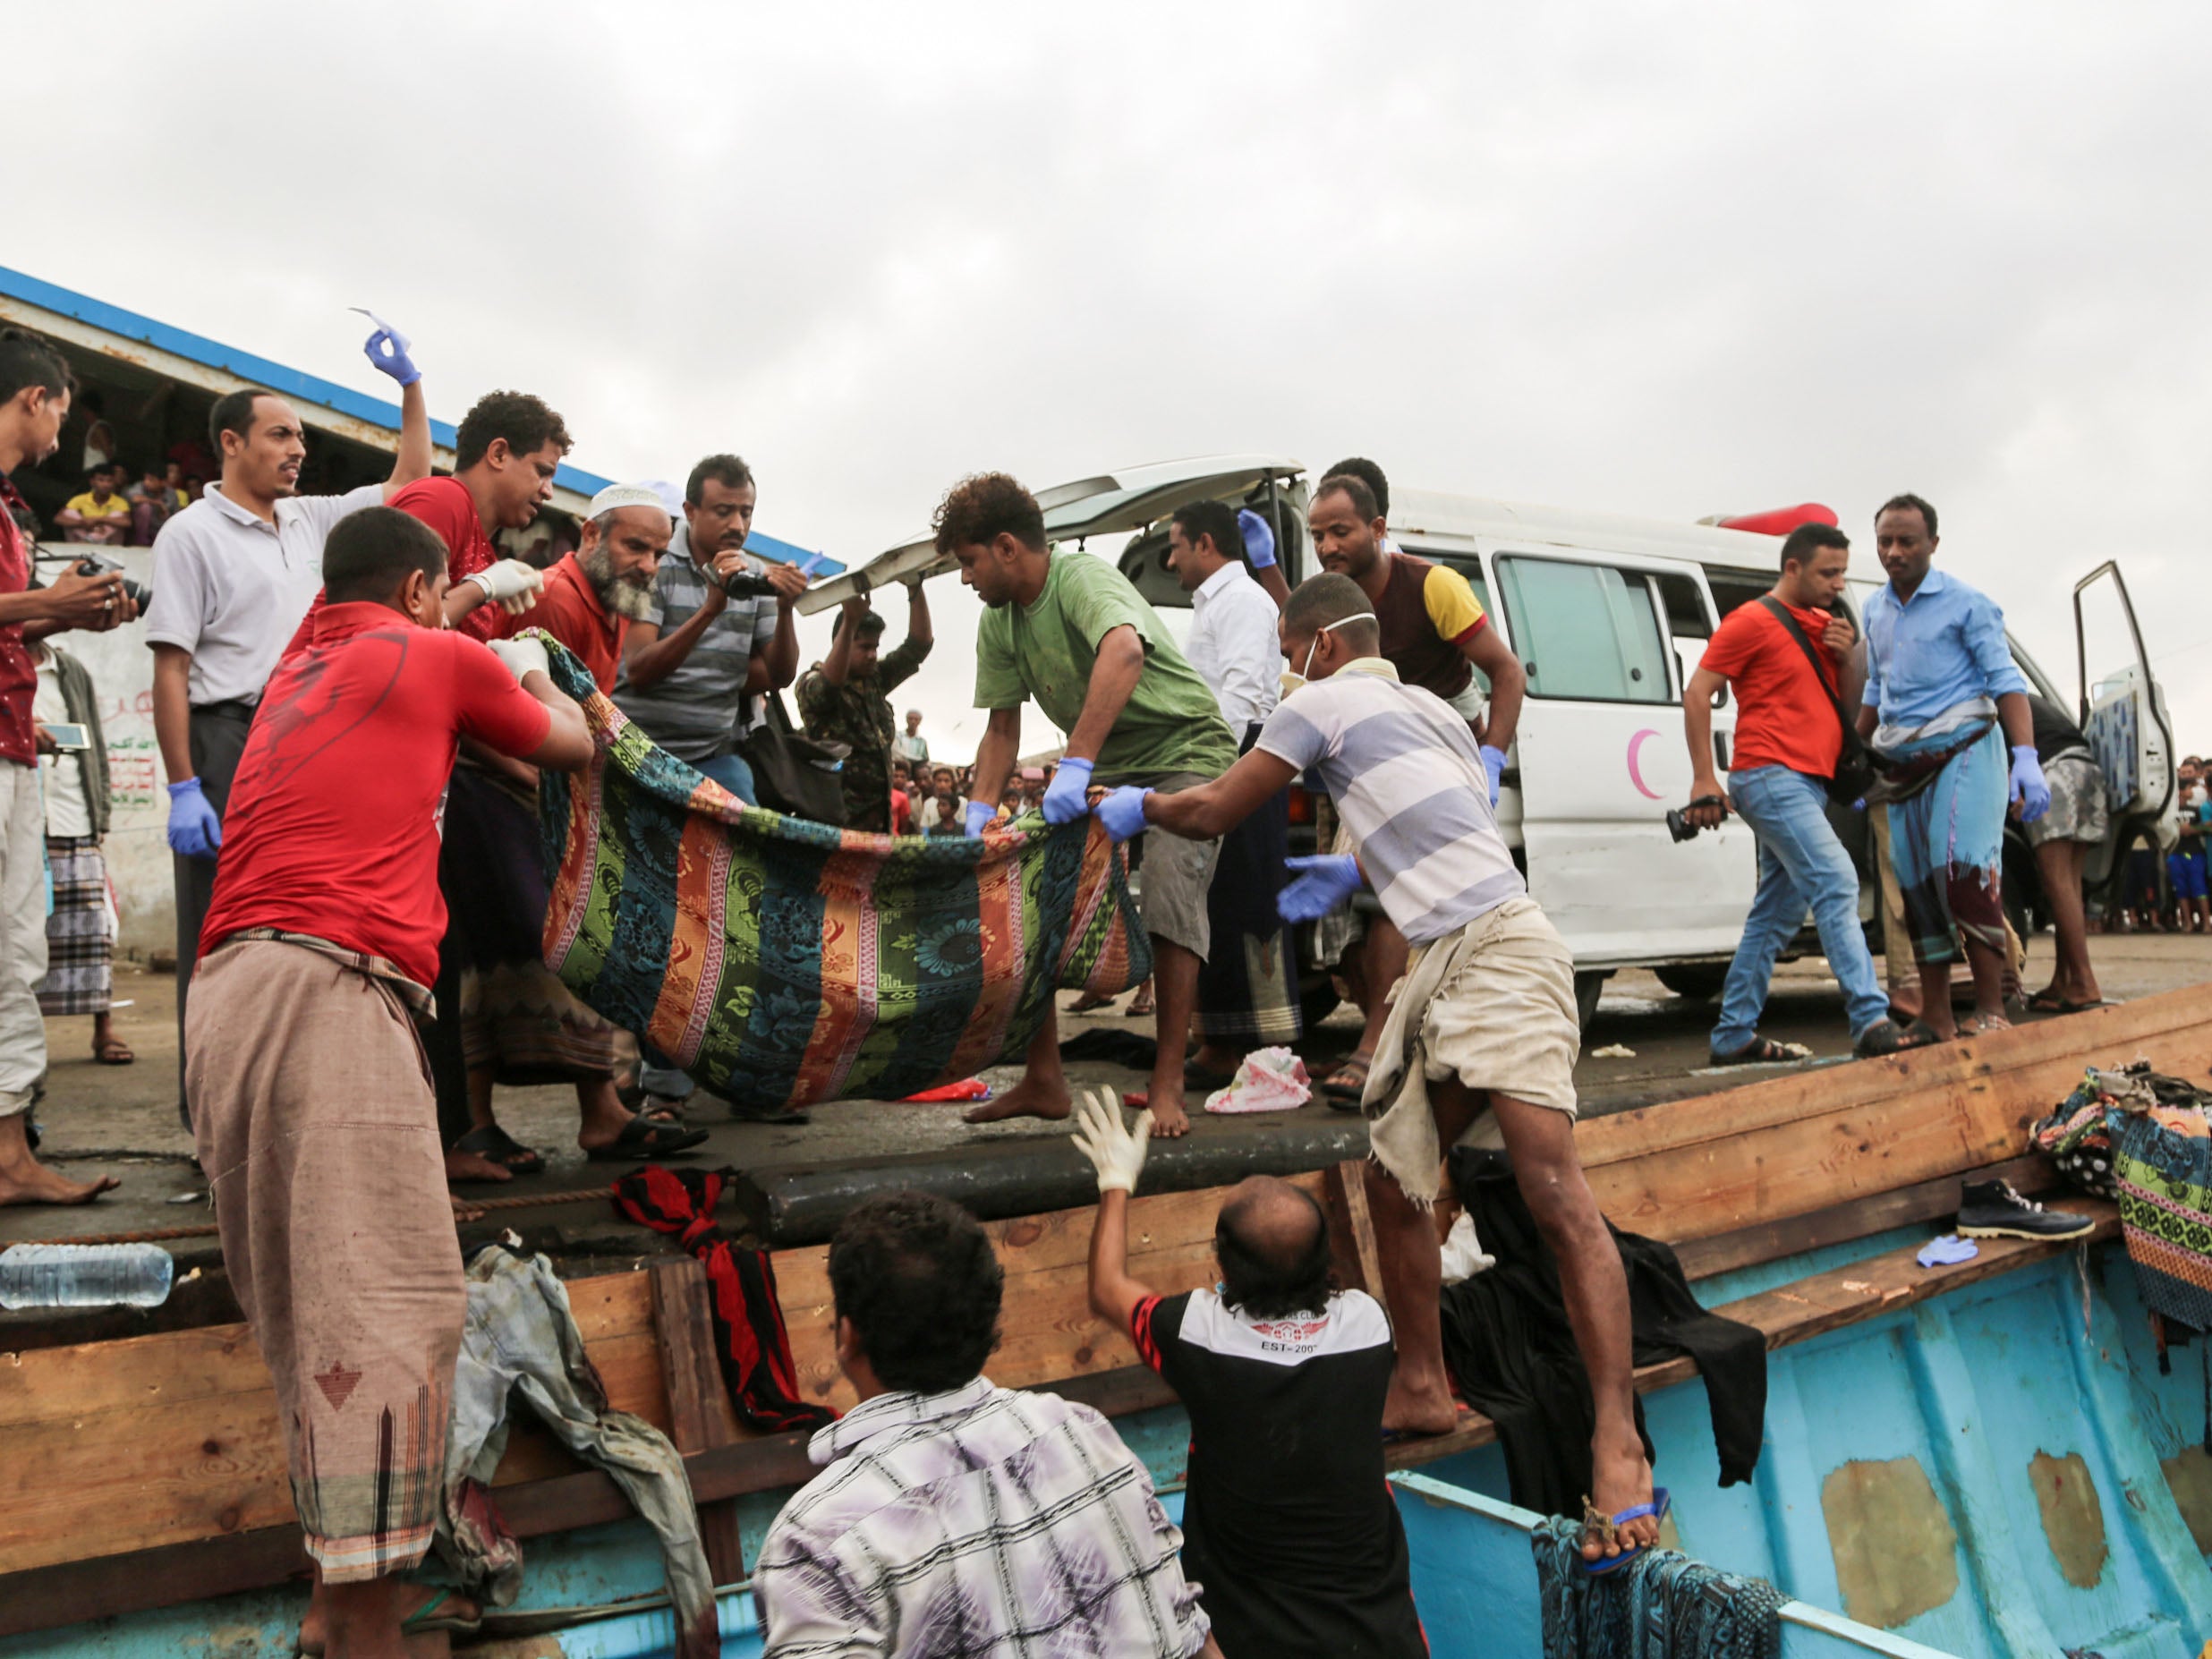 Bodies of people who were killed in a boat carrying Somali refugees arriving in the rebel-held Yemeni port city of Hodeida